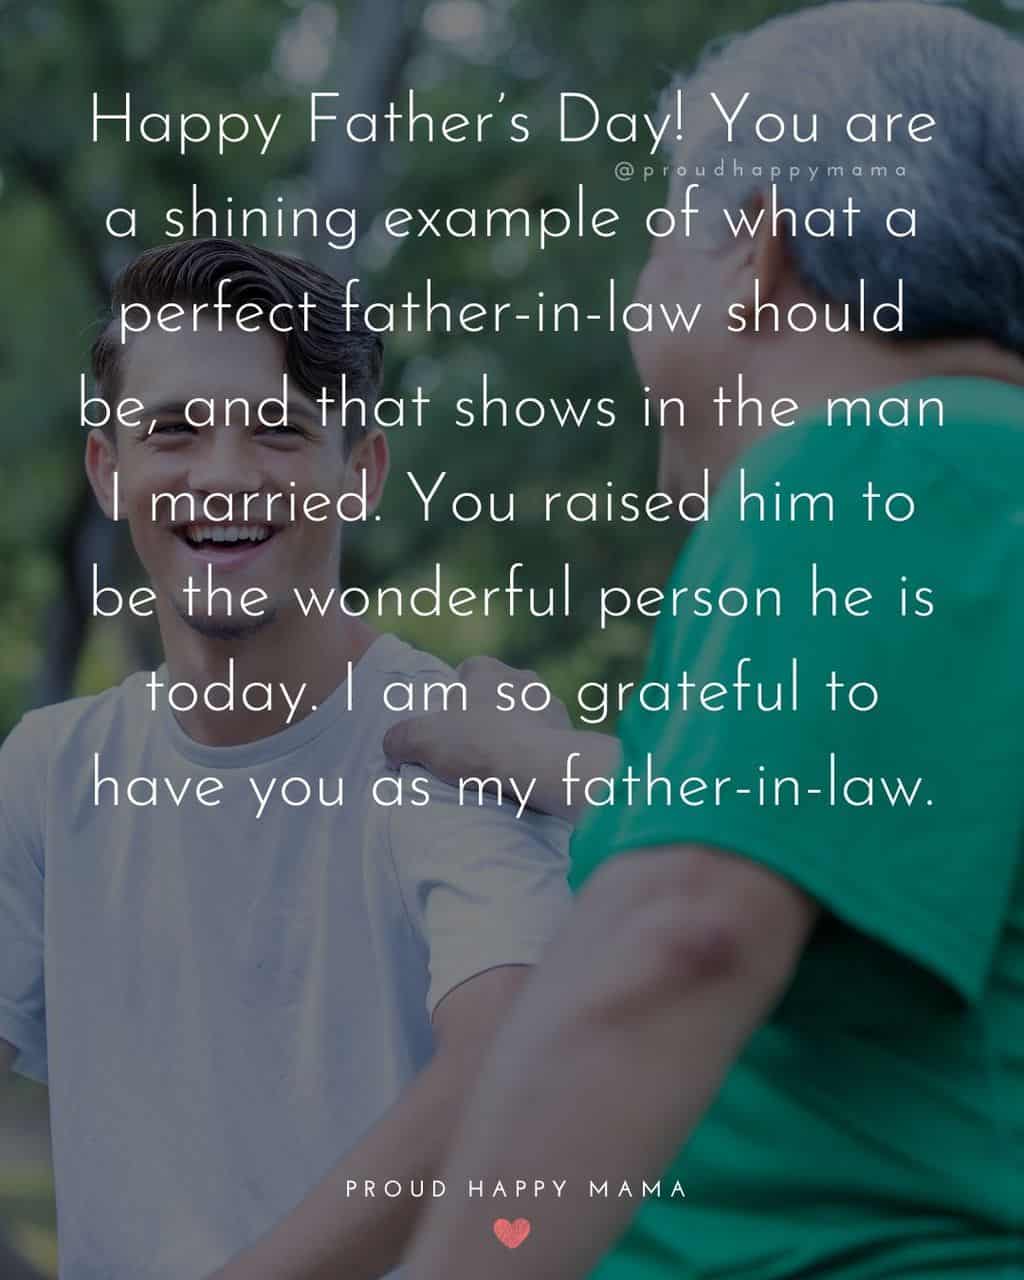 Happy Fathers Day Quotes For Father In Law - Happy Father’s Day! You are a shining example of what a perfect father-in-law